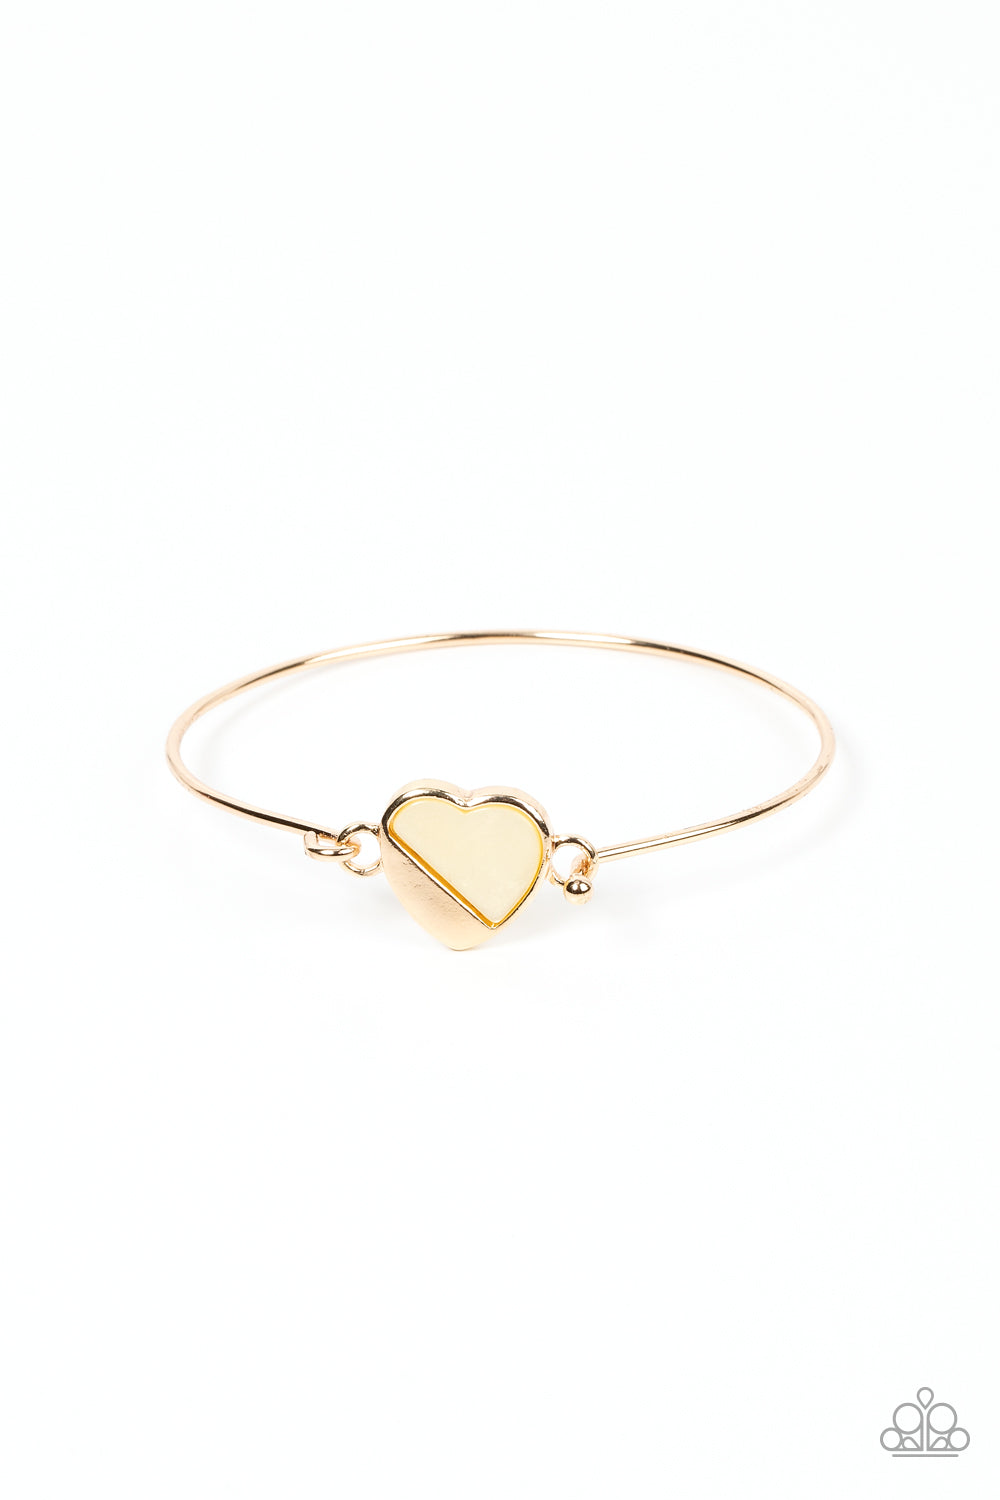 Hidden Intentions Gold Bracelet - Paparazzi Accessories  A glistening gold plate slants across a white shell-like heart charm that delicately hinges to a dainty gold bangle-like bracelet, creating a charming centerpiece around the wrist. Features a barbell closure.  Sold as one individual bracelet.